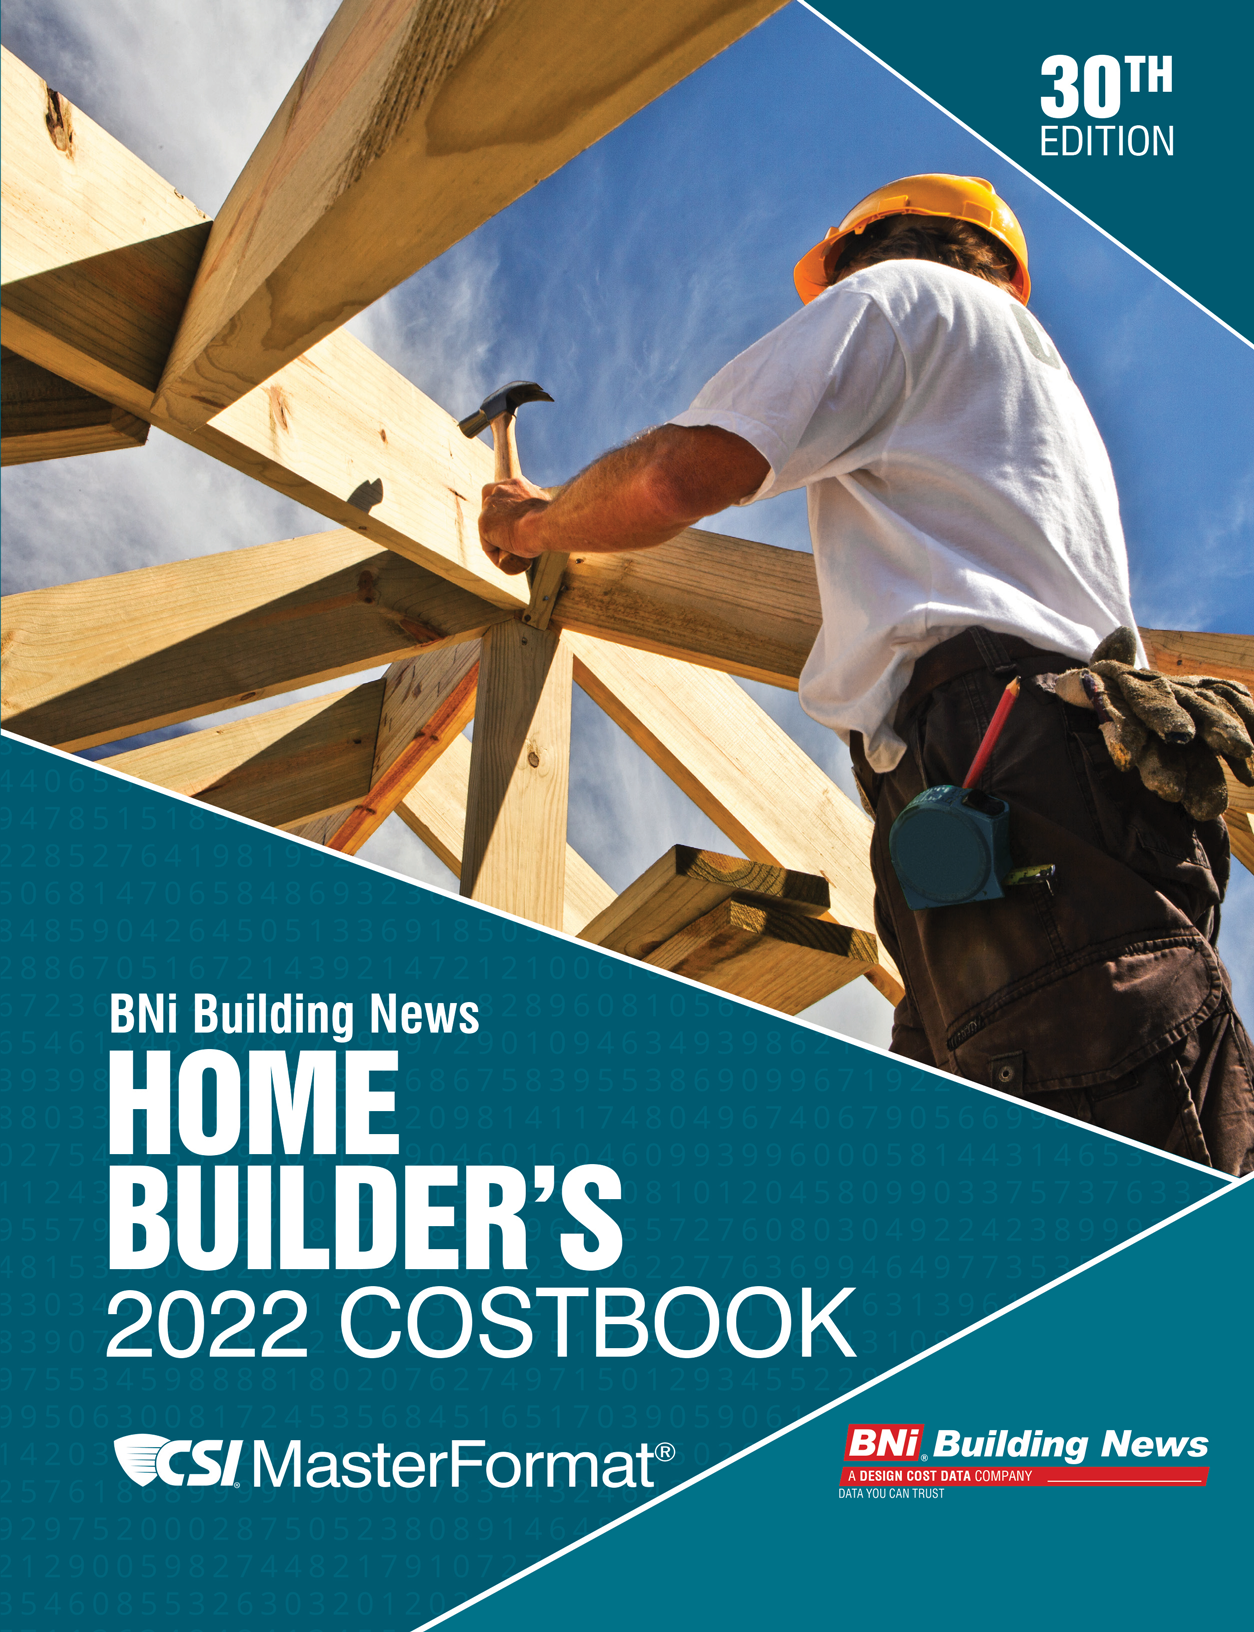 BNi_HOME-BUILDERS_2022_Costbook_1254x1632.png